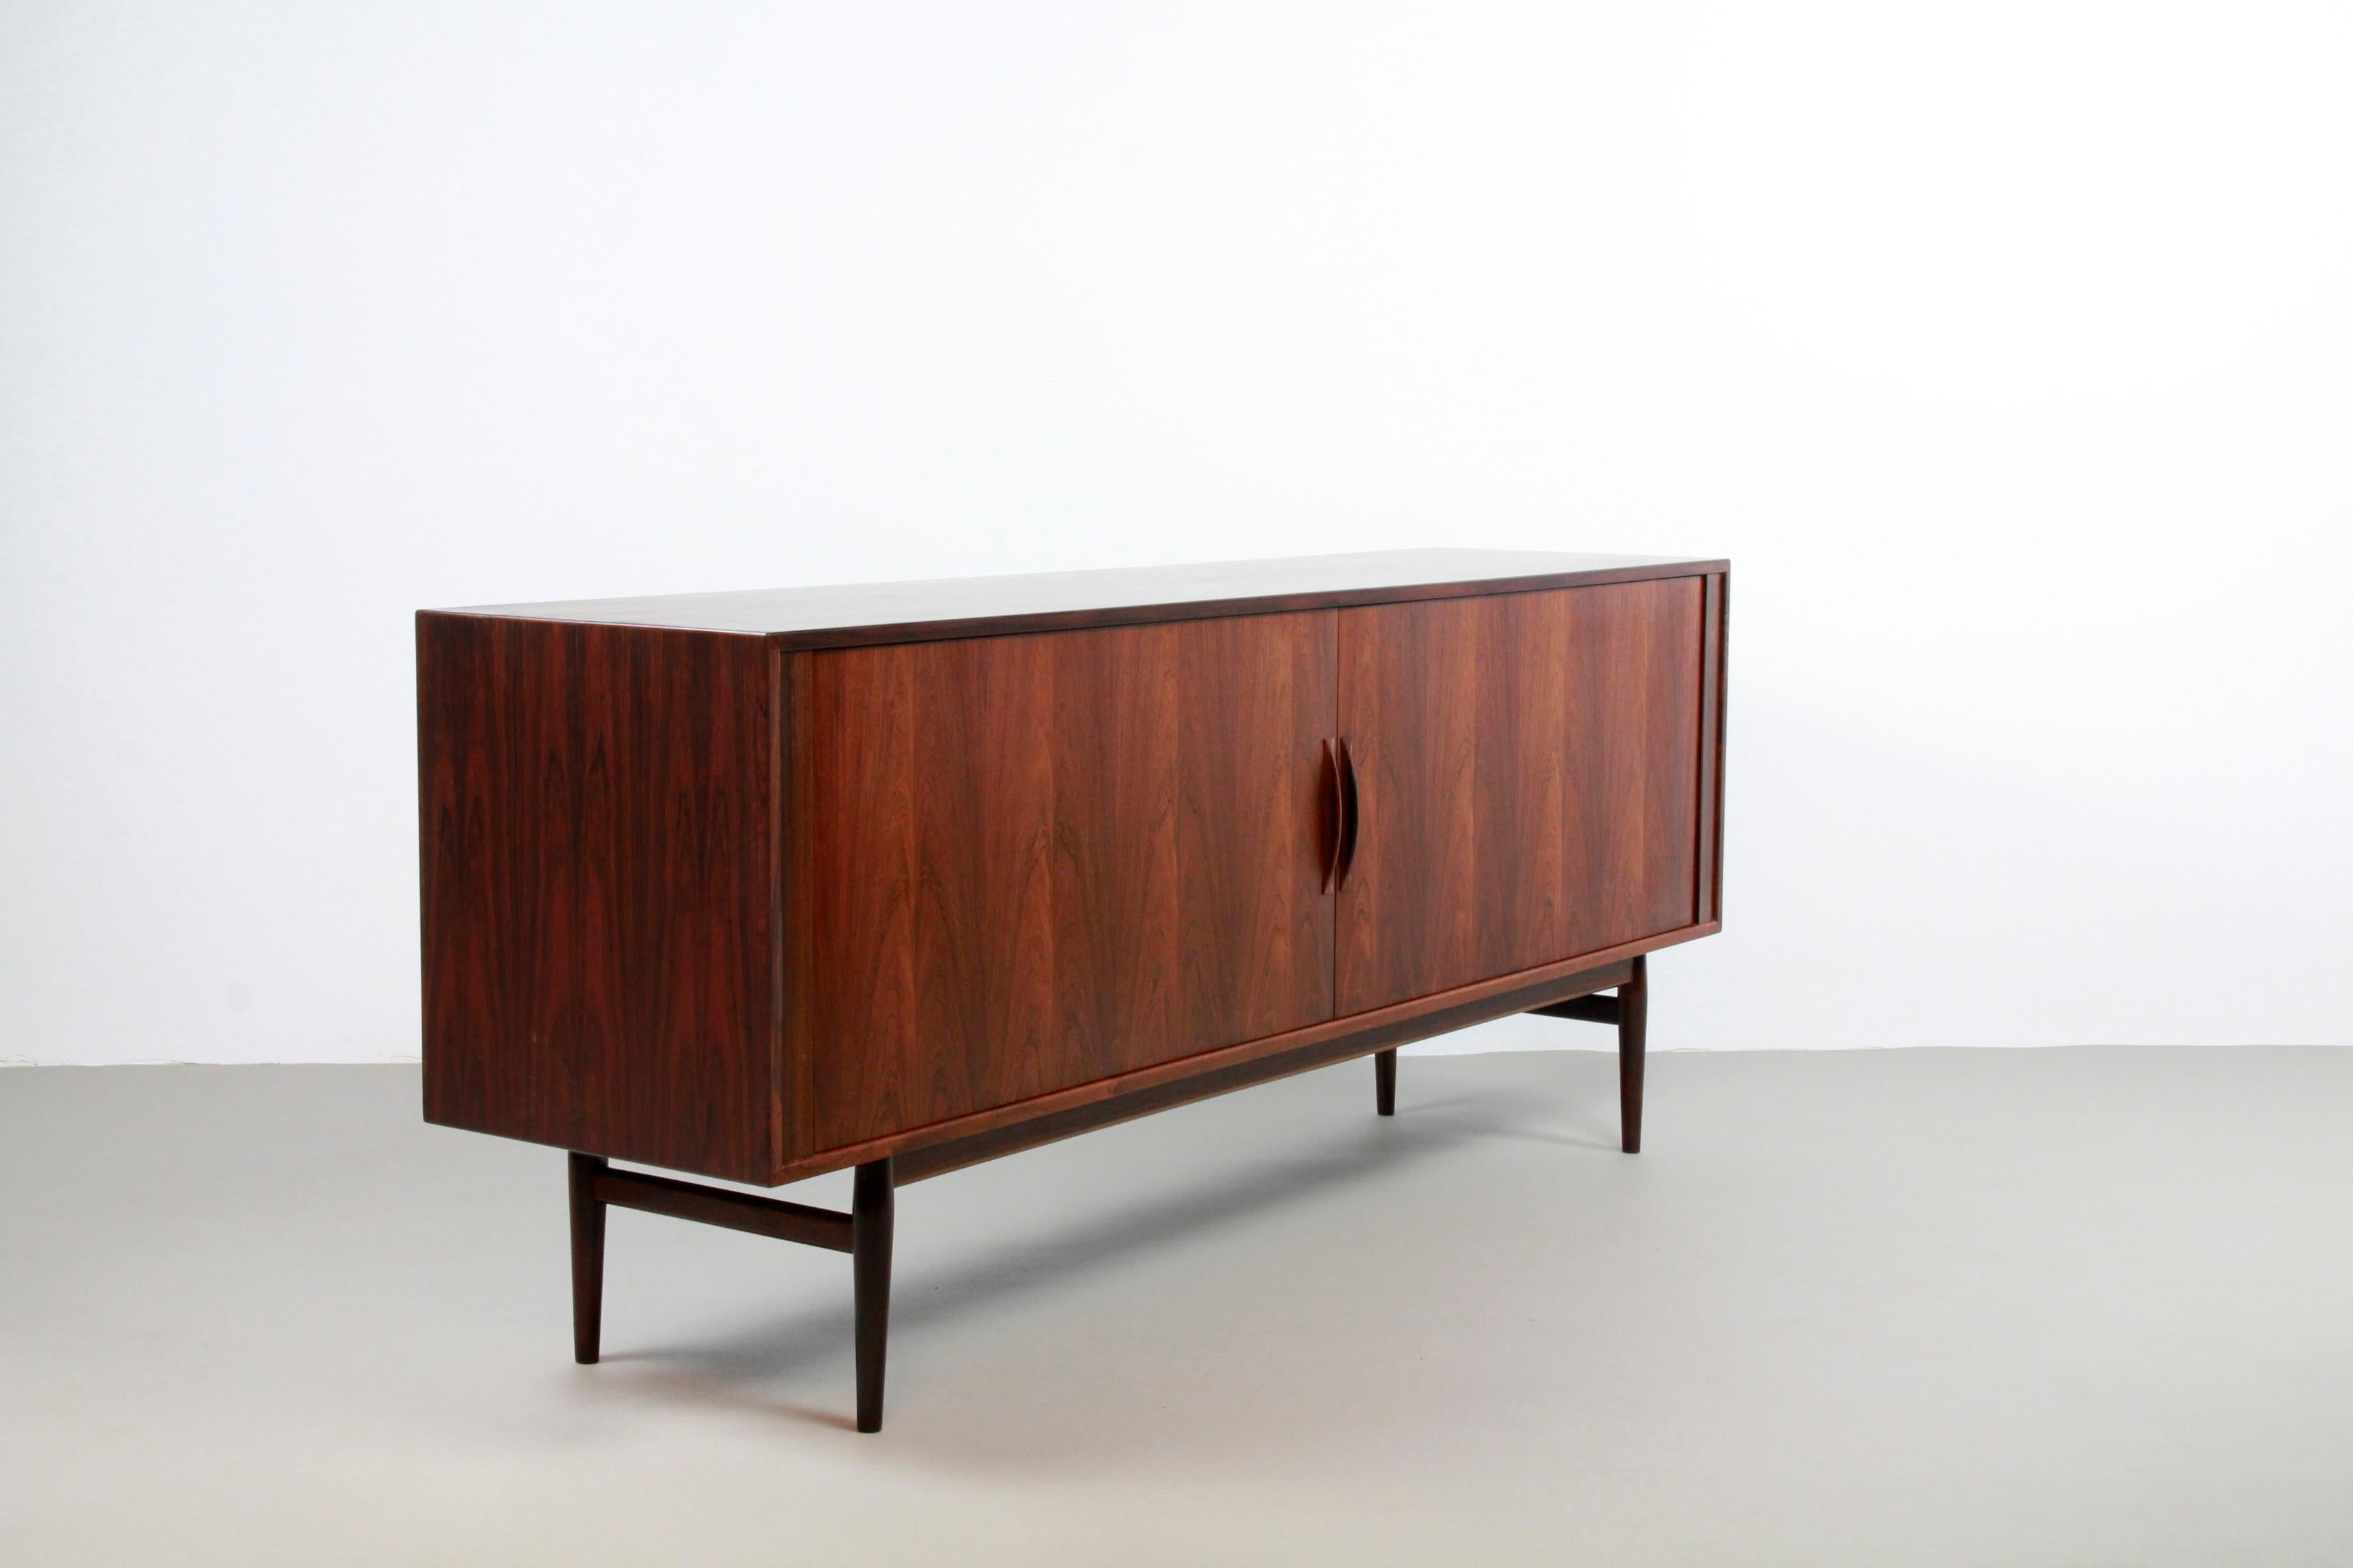 Particularly beautiful sideboard, Model 37, designed by Danish designer Arne Vodder for Sibast, Denmark in the 60's. The sideboard is made of tropical hardwood and has a very nice pattern in the woodgrain. The sideboard has two 'tambour' sliding